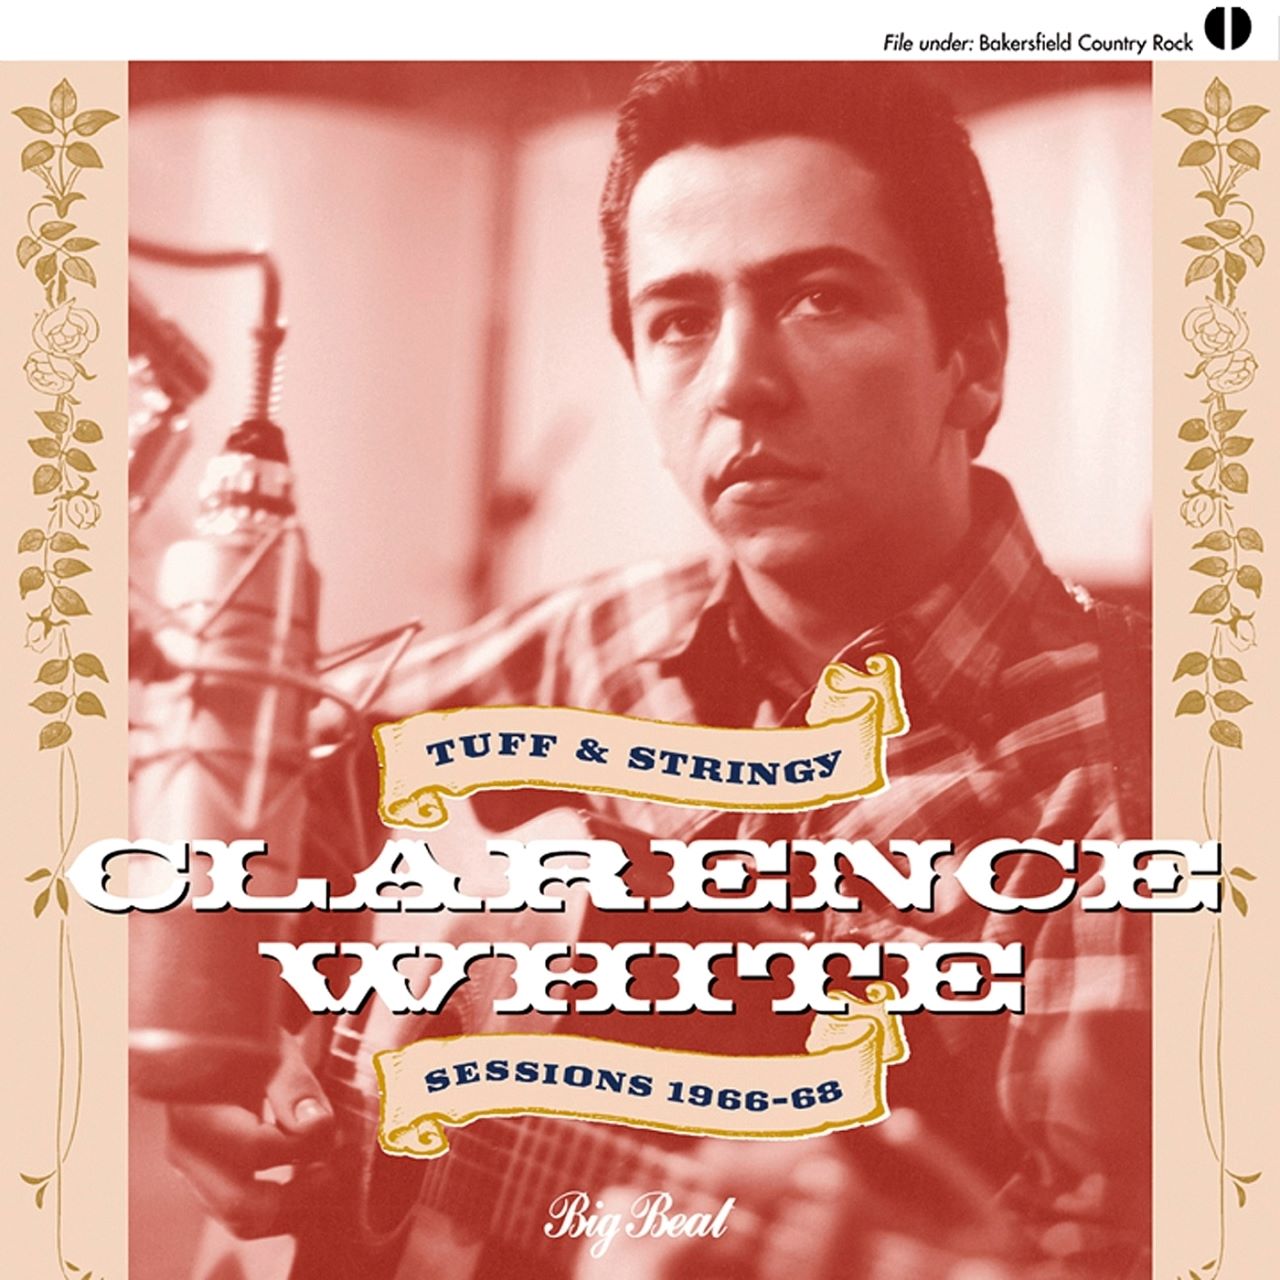 Clarence White - Tuff & Stringy – Sessions 1966-68 cover album